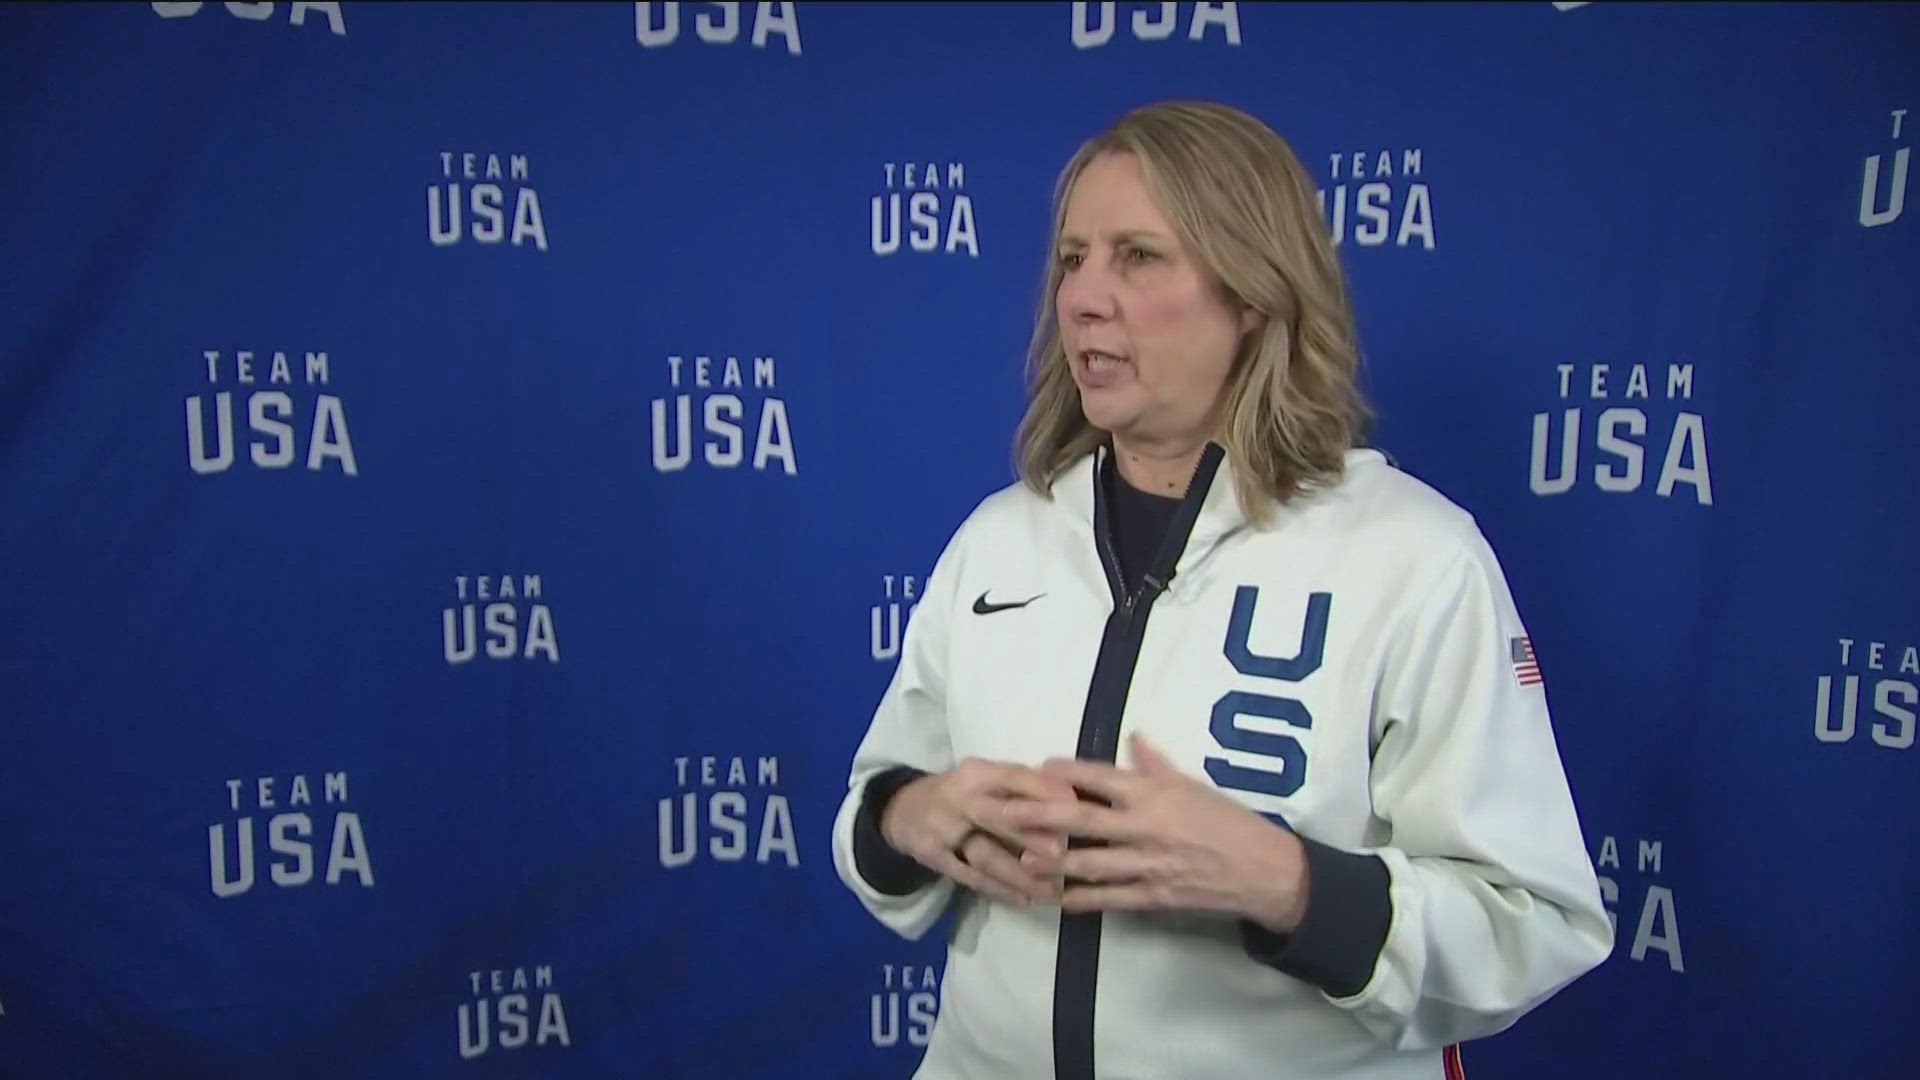 While the roster for Team USA has yet to be announced, Coach Cheryl Reeve knows the value of building strong chemistry.